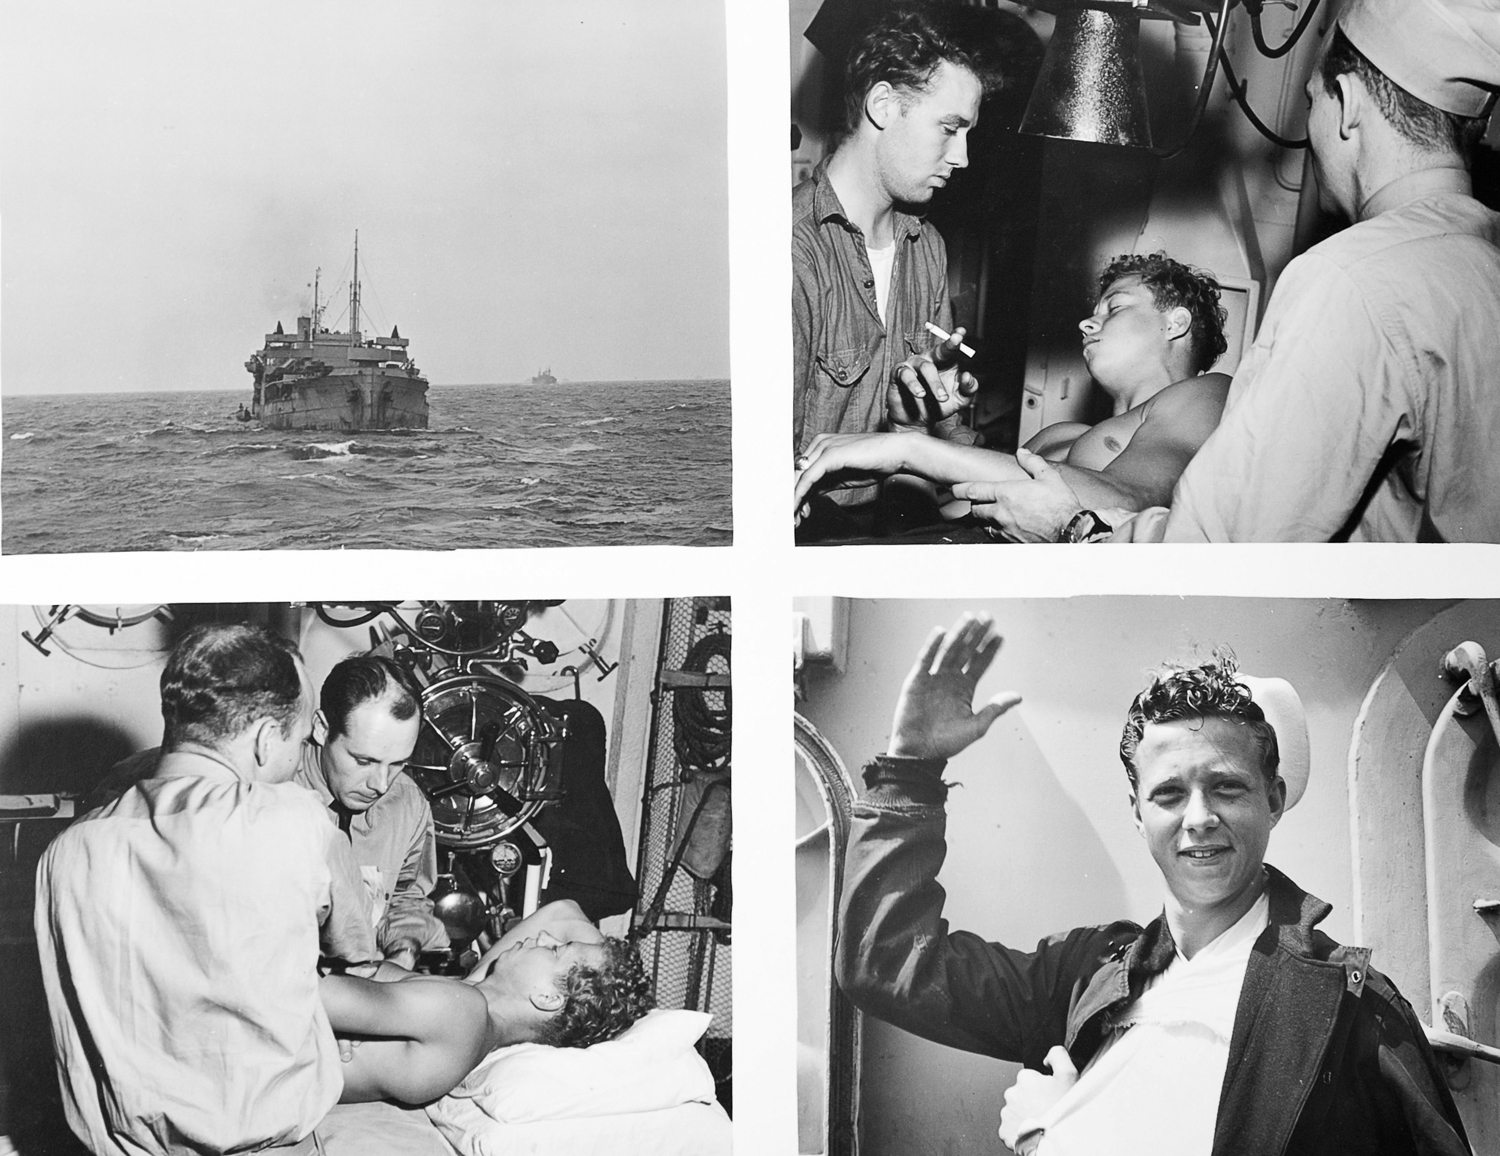 Dr. Van Derschour (lower left) treats a sailor from a cargo ship during convoy operations.